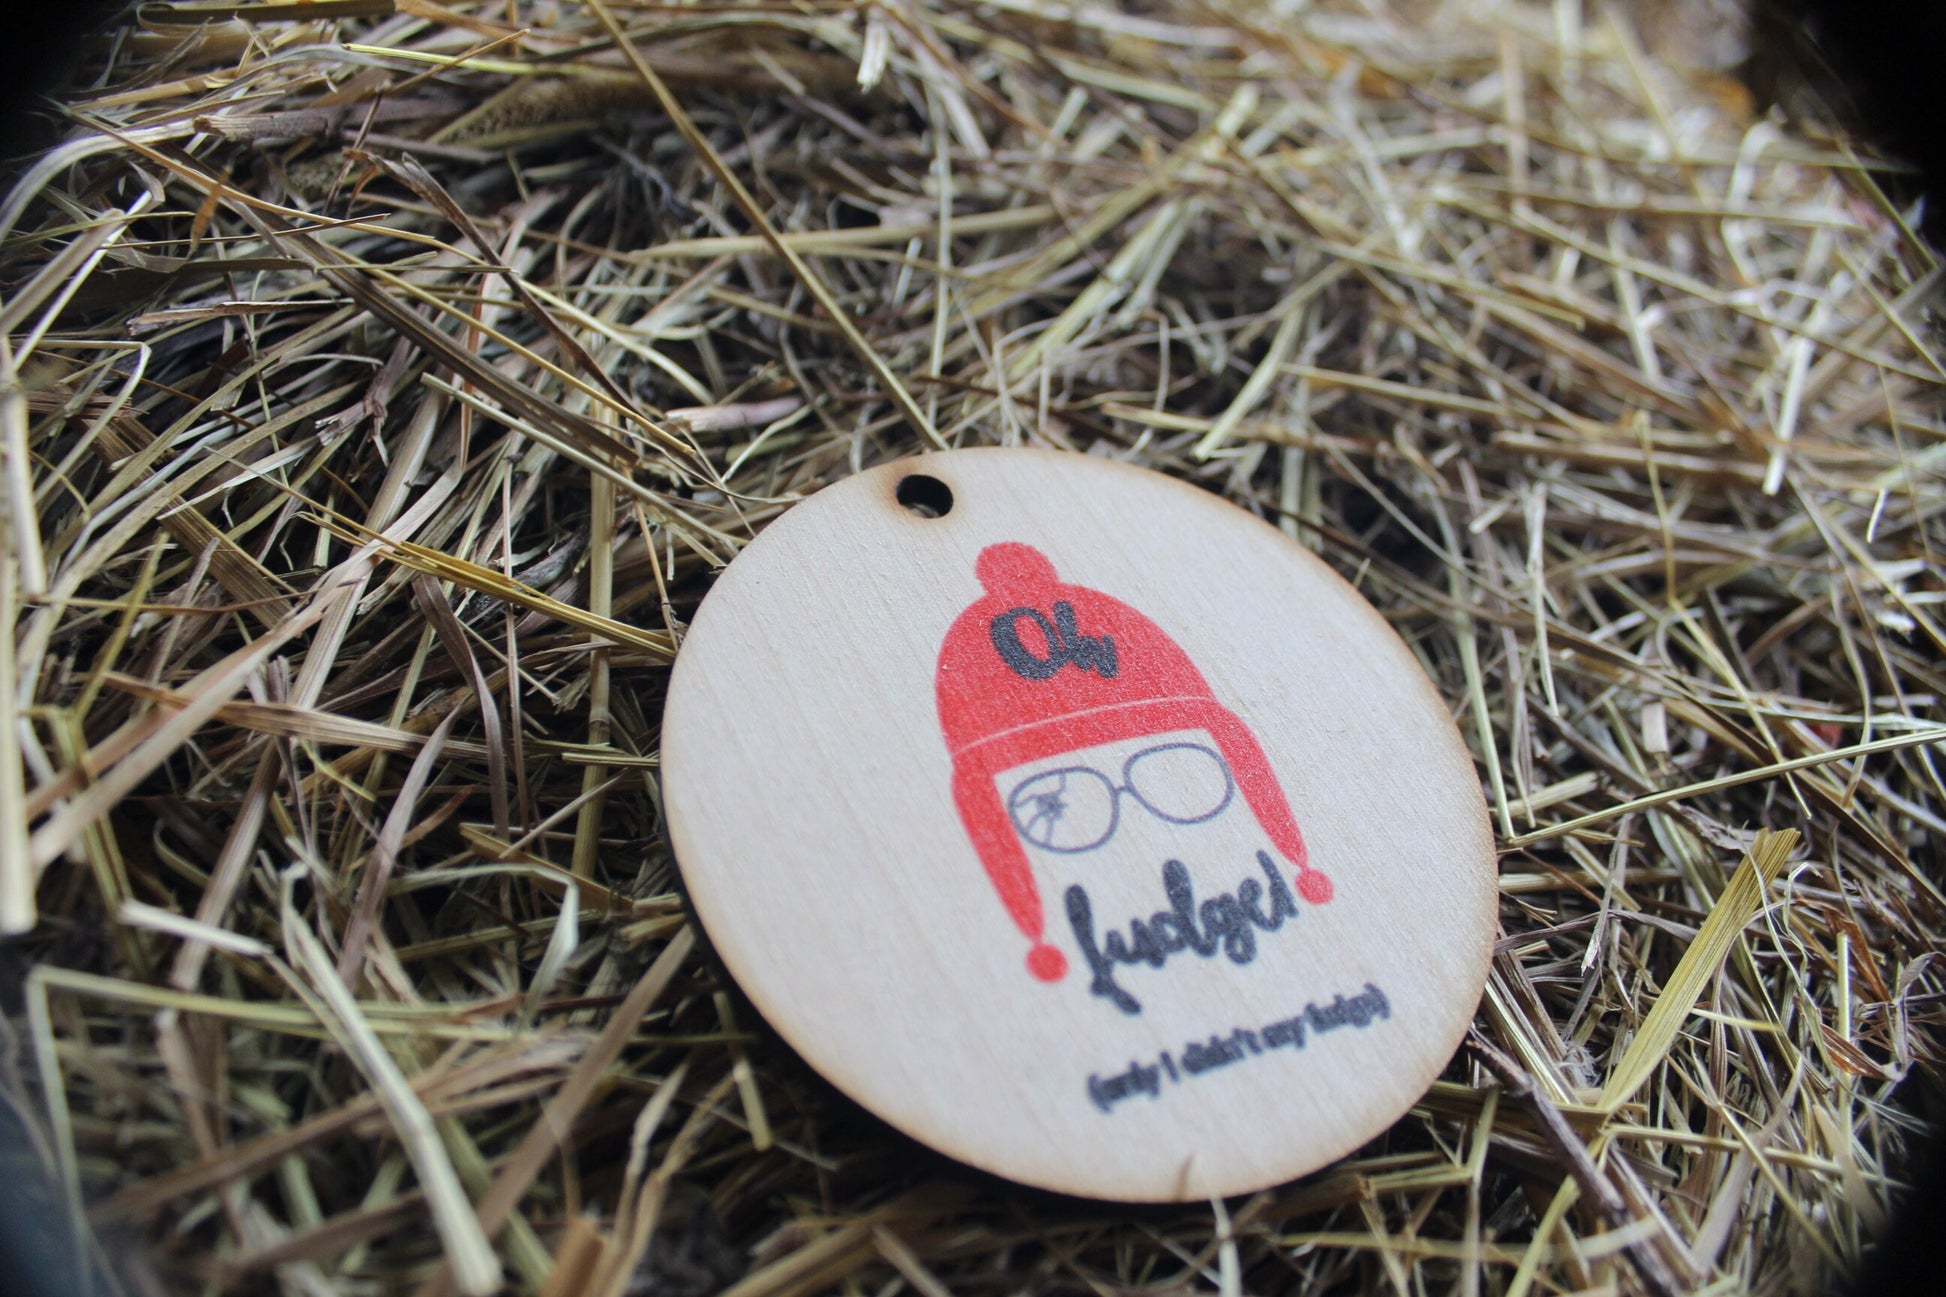 Oh Fudge Glasses Busted Funny Joke Tradition Happy Times Holiday Keychain Gift Christmas Tag Ornament